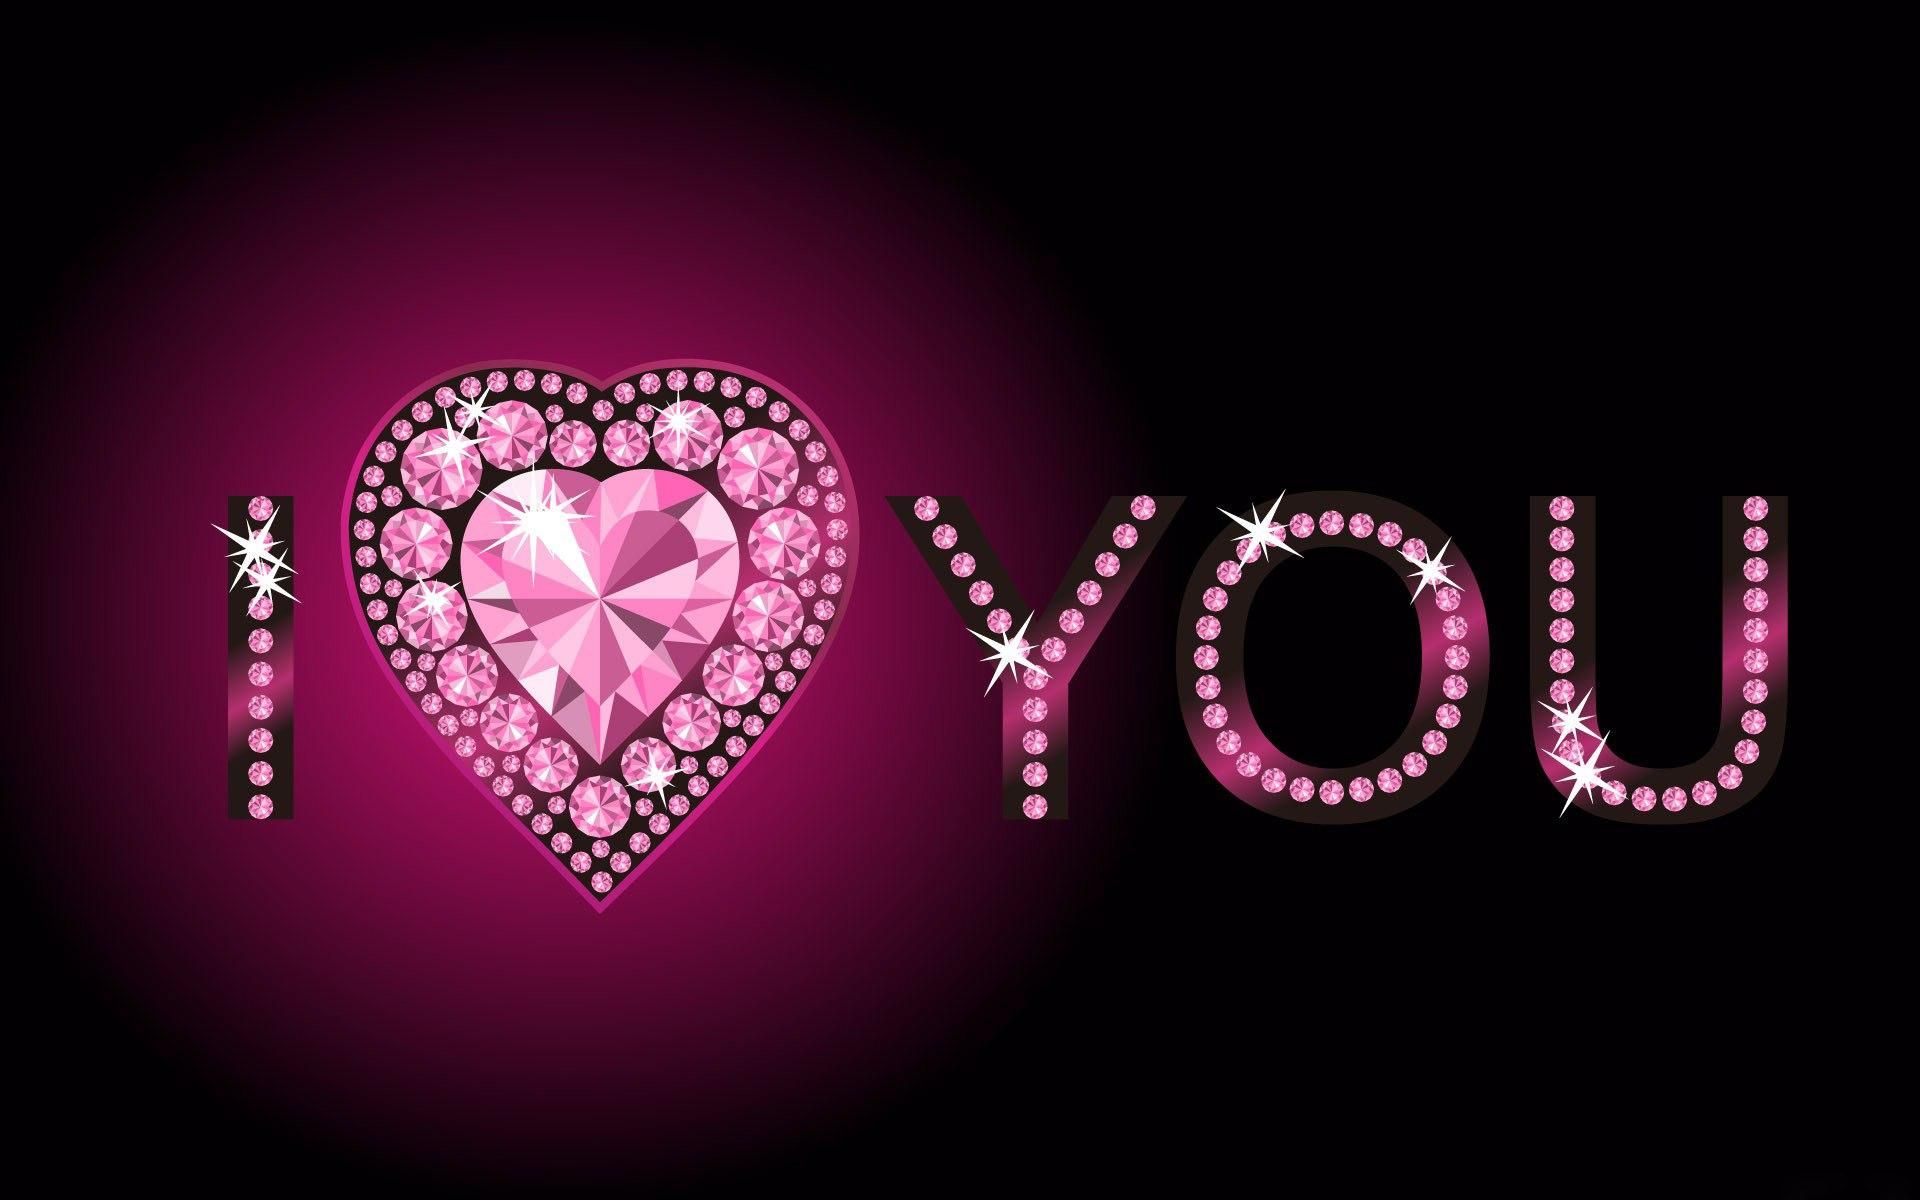 Love you valentine day wallpaper downloads backgrounds - (#27500 ...